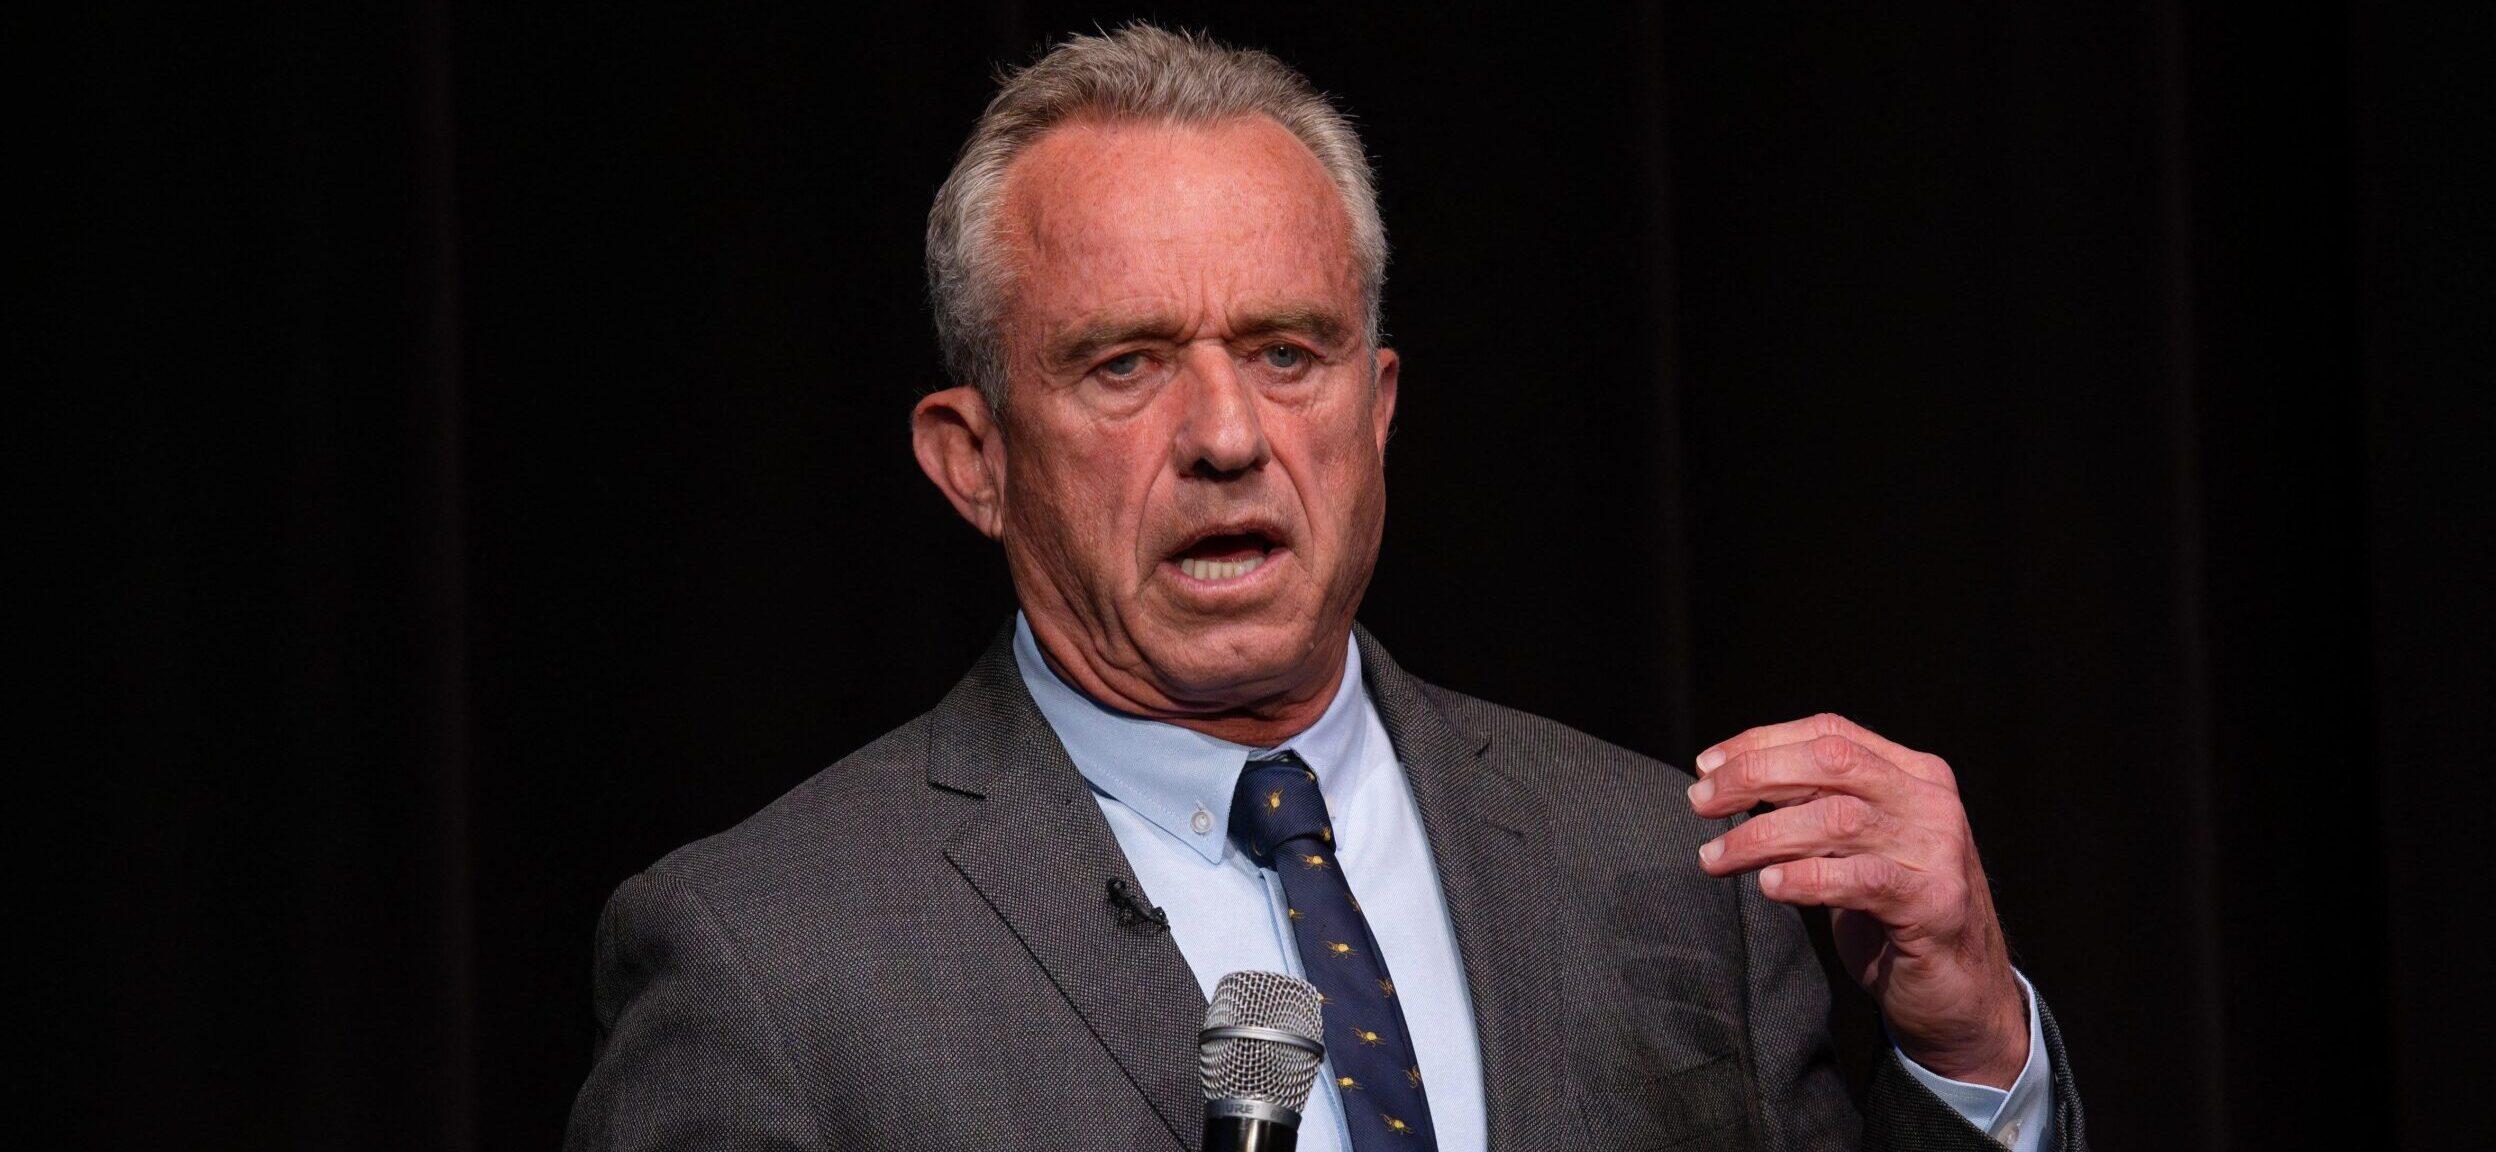 Robert F. Kennedy Jr. Breaks Silence On Reports Of Being Donald Trump's VP